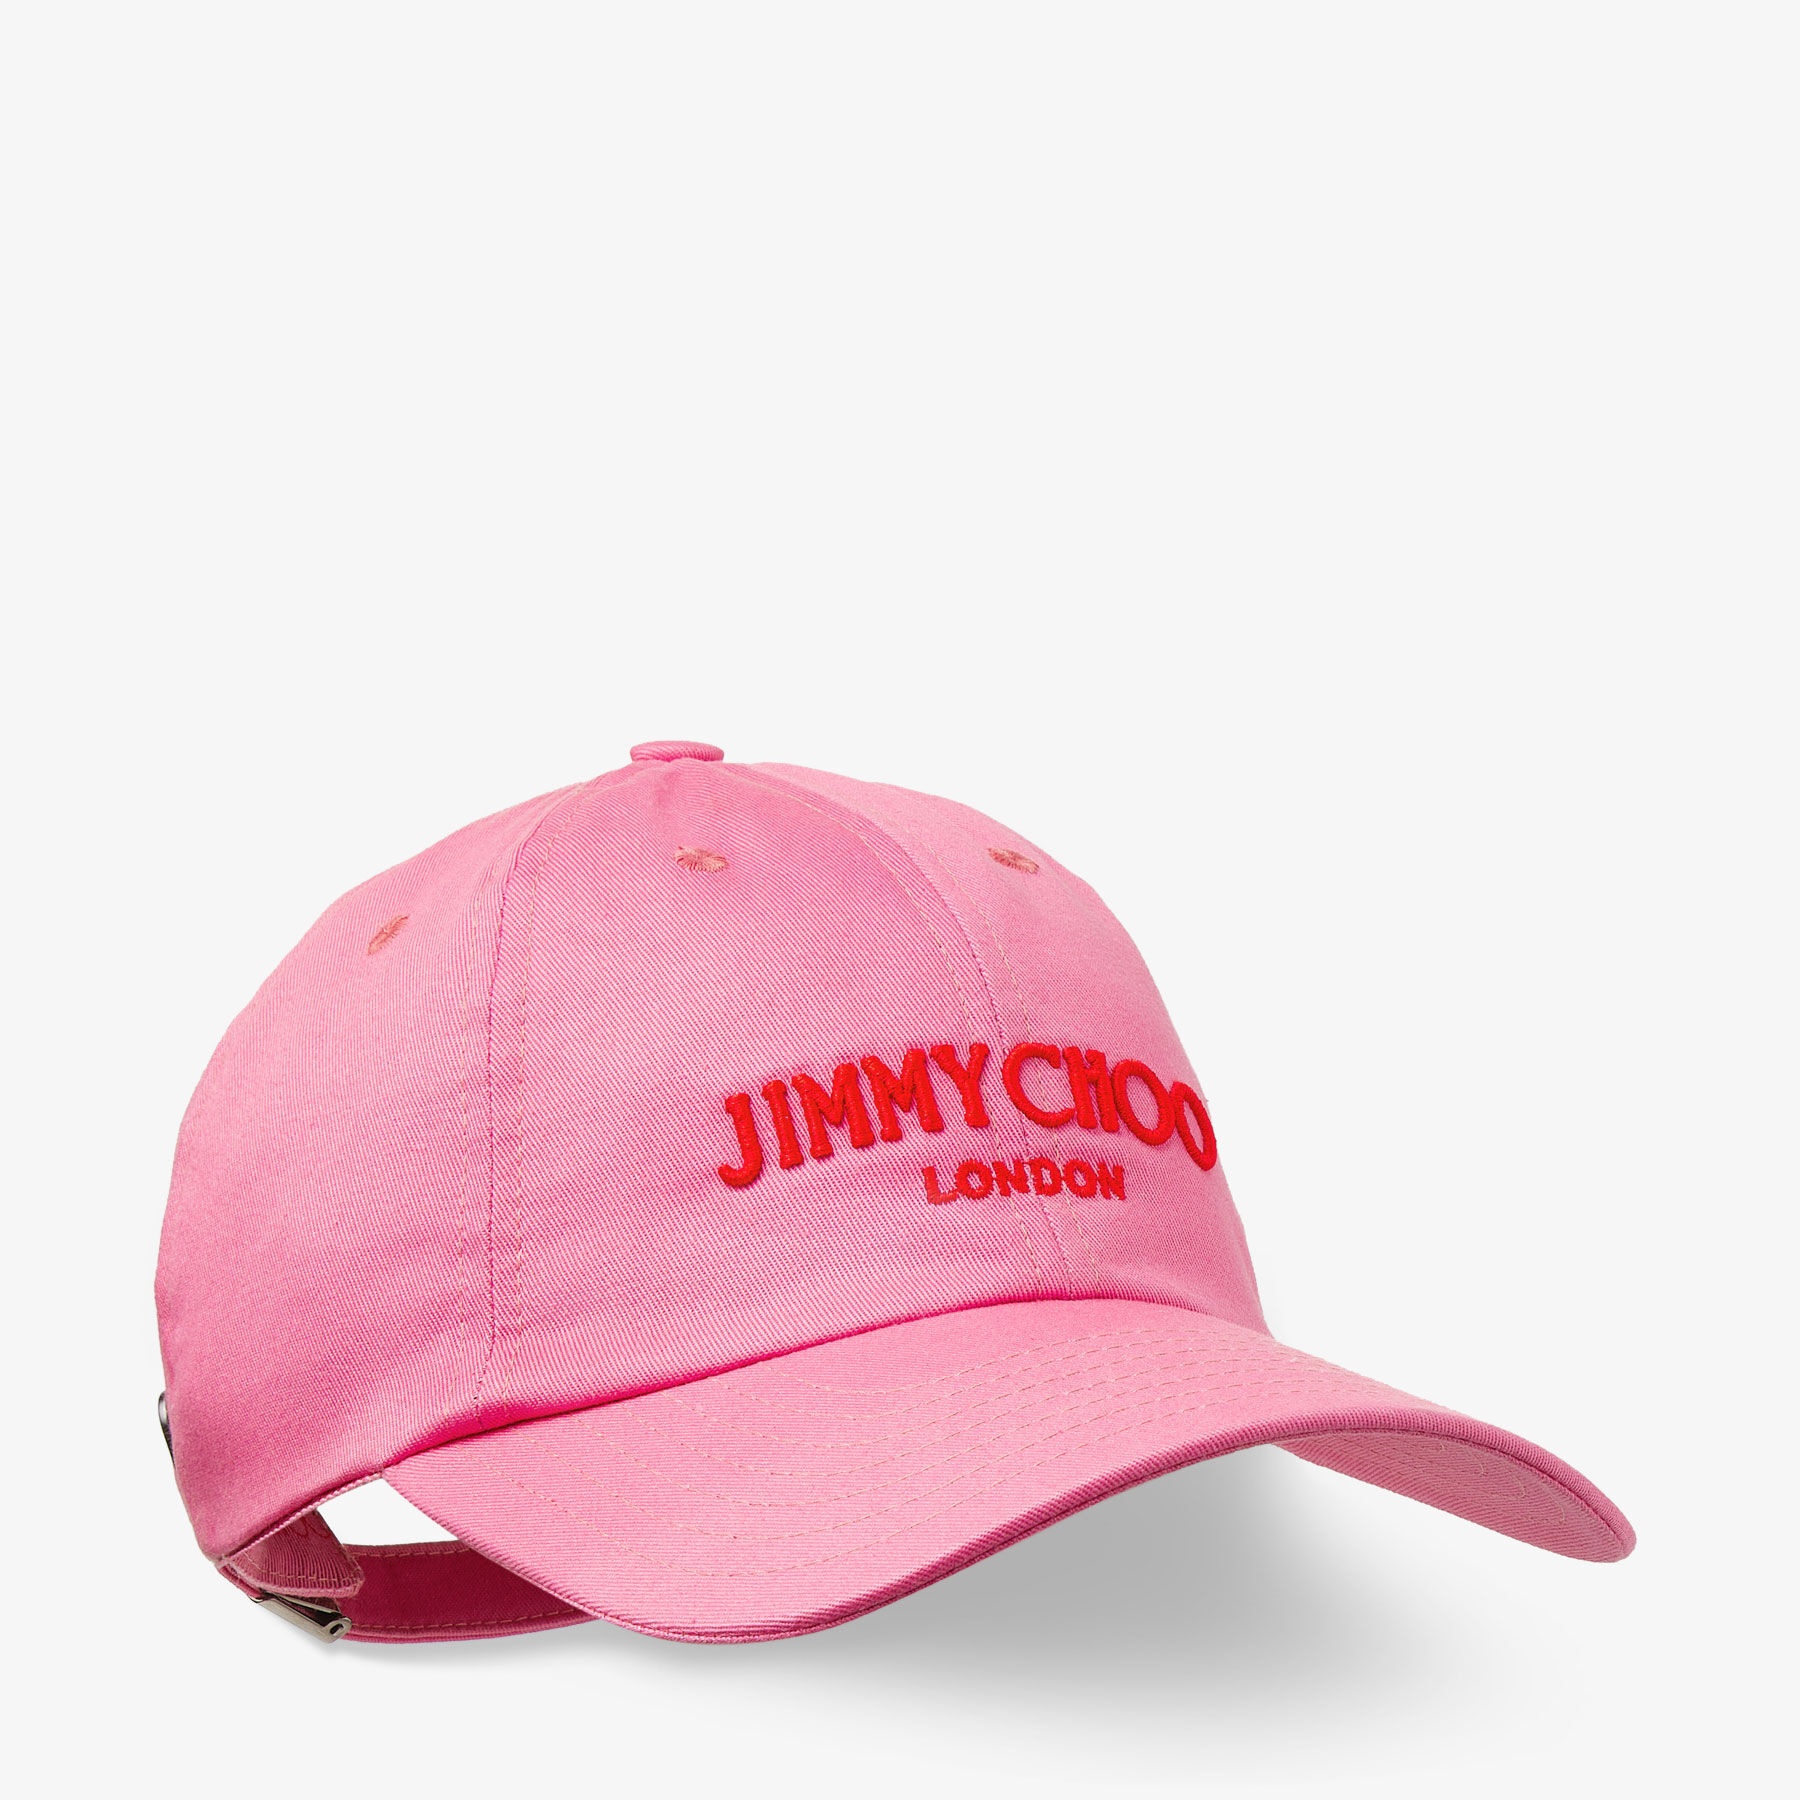 Pacifico
Paprika/Candy Pink Embroidered Cotton Baseball Cap - 1